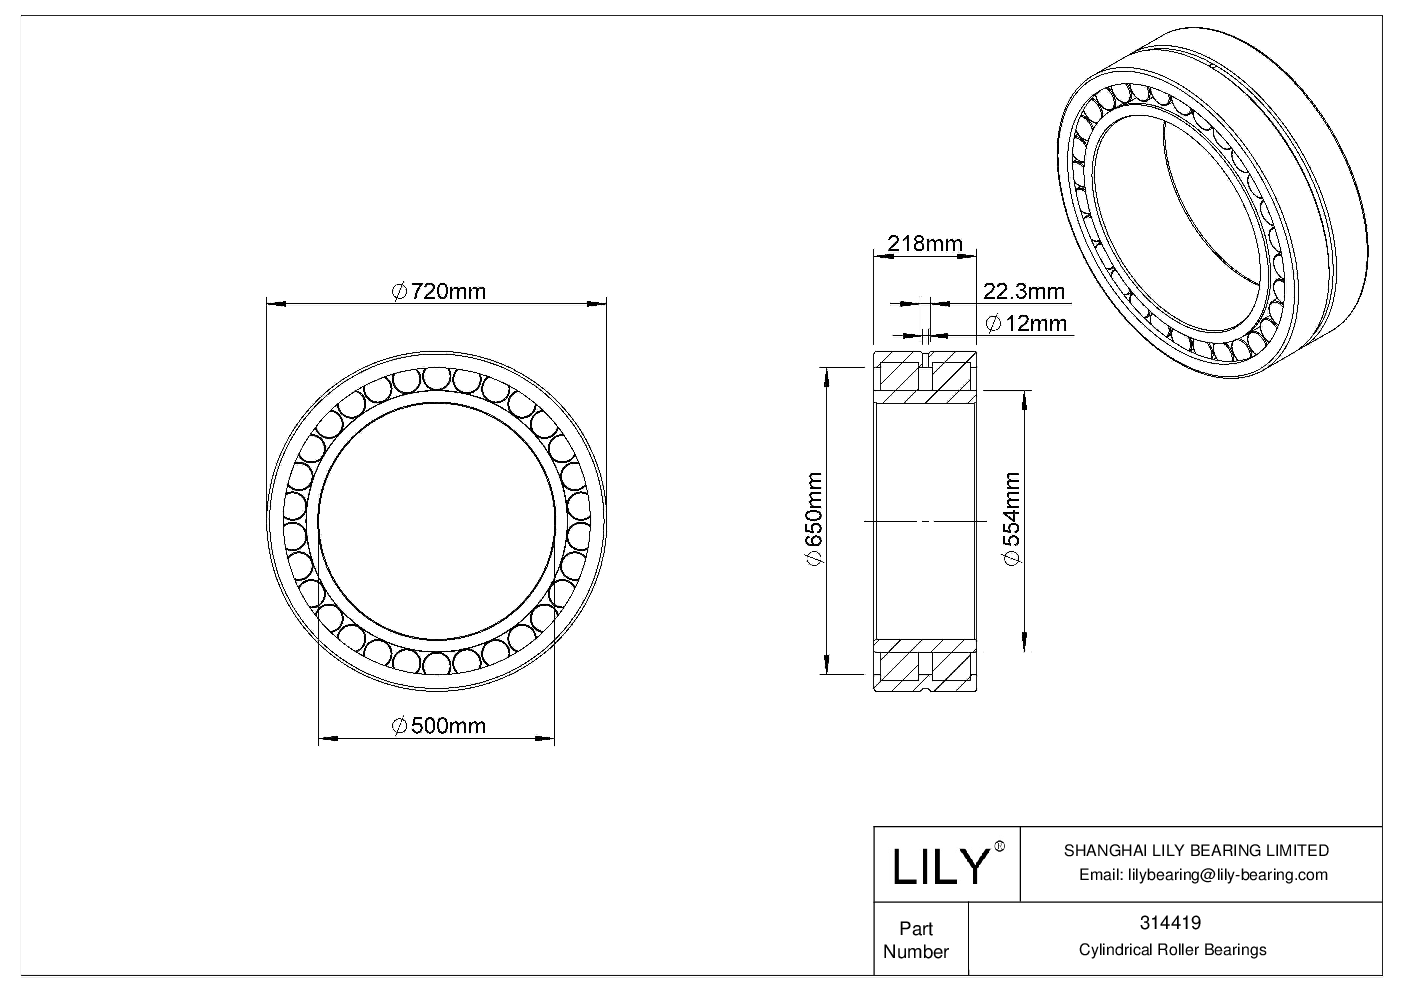 314419 Double Row Cylindrical Roller Bearings cad drawing